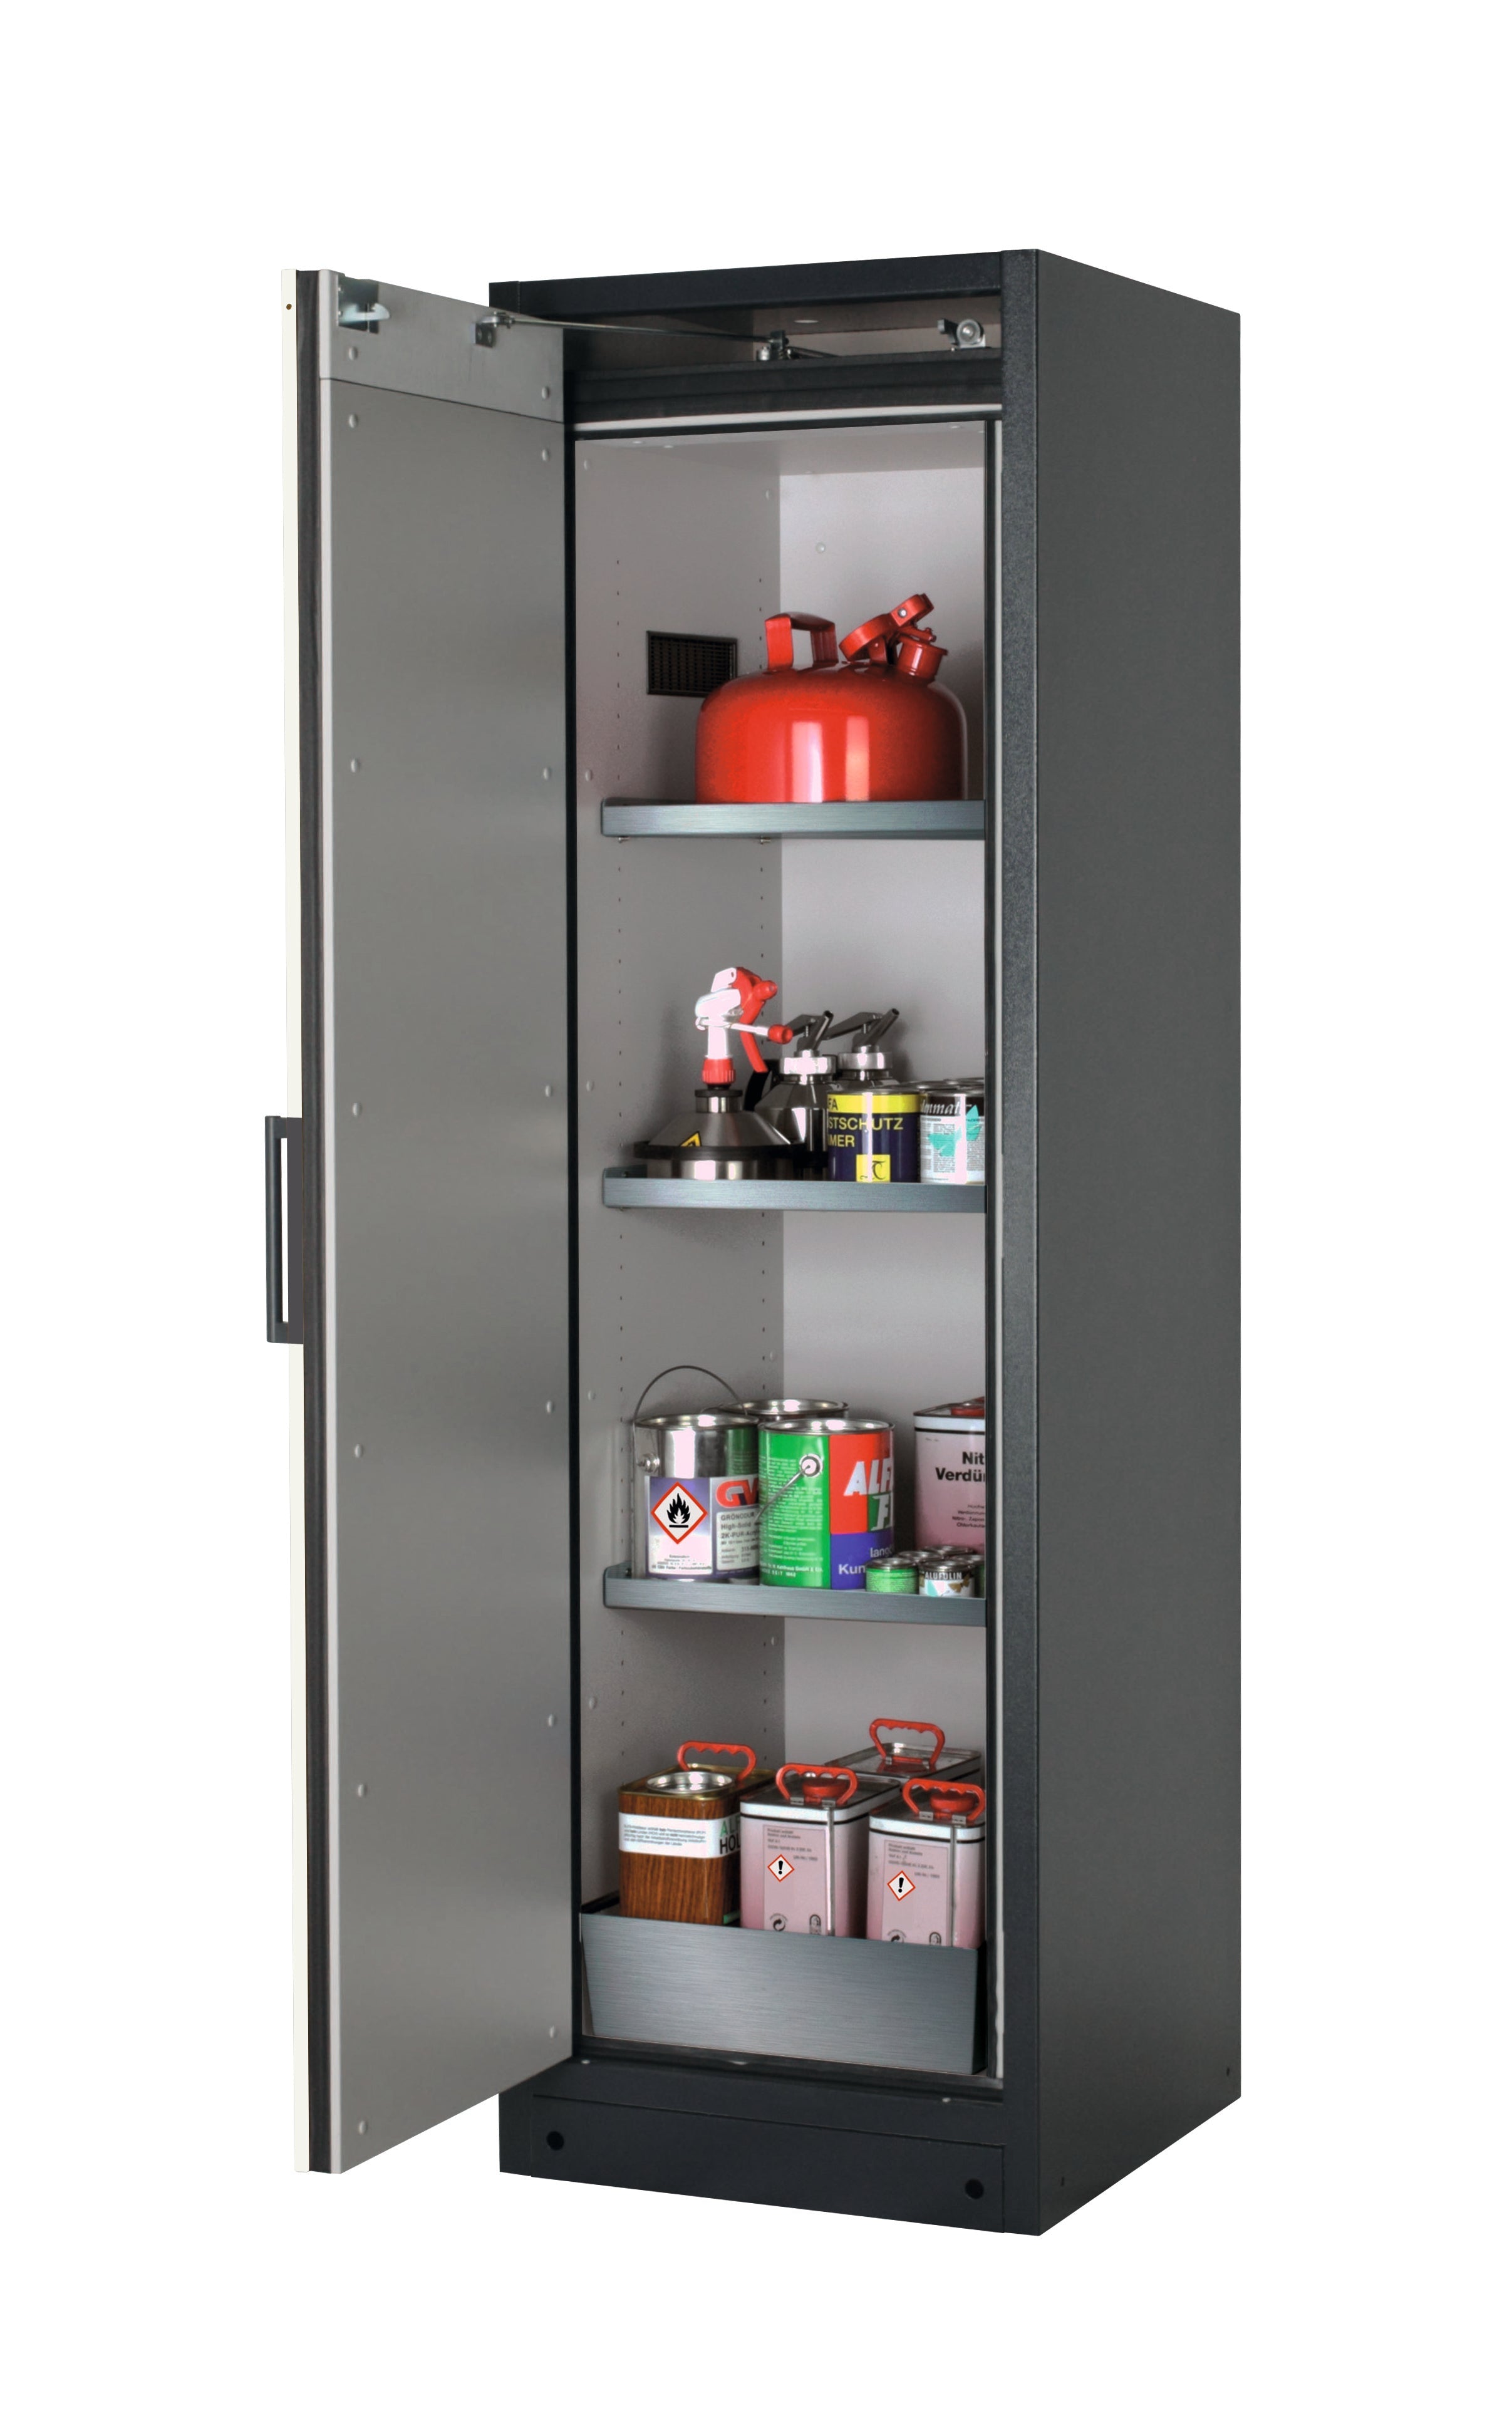 Type 90 safety storage cabinet Q-PEGASUS-90 model Q90.195.060.WDAC in asecos silver with 3x shelf standard (stainless steel 1.4301),